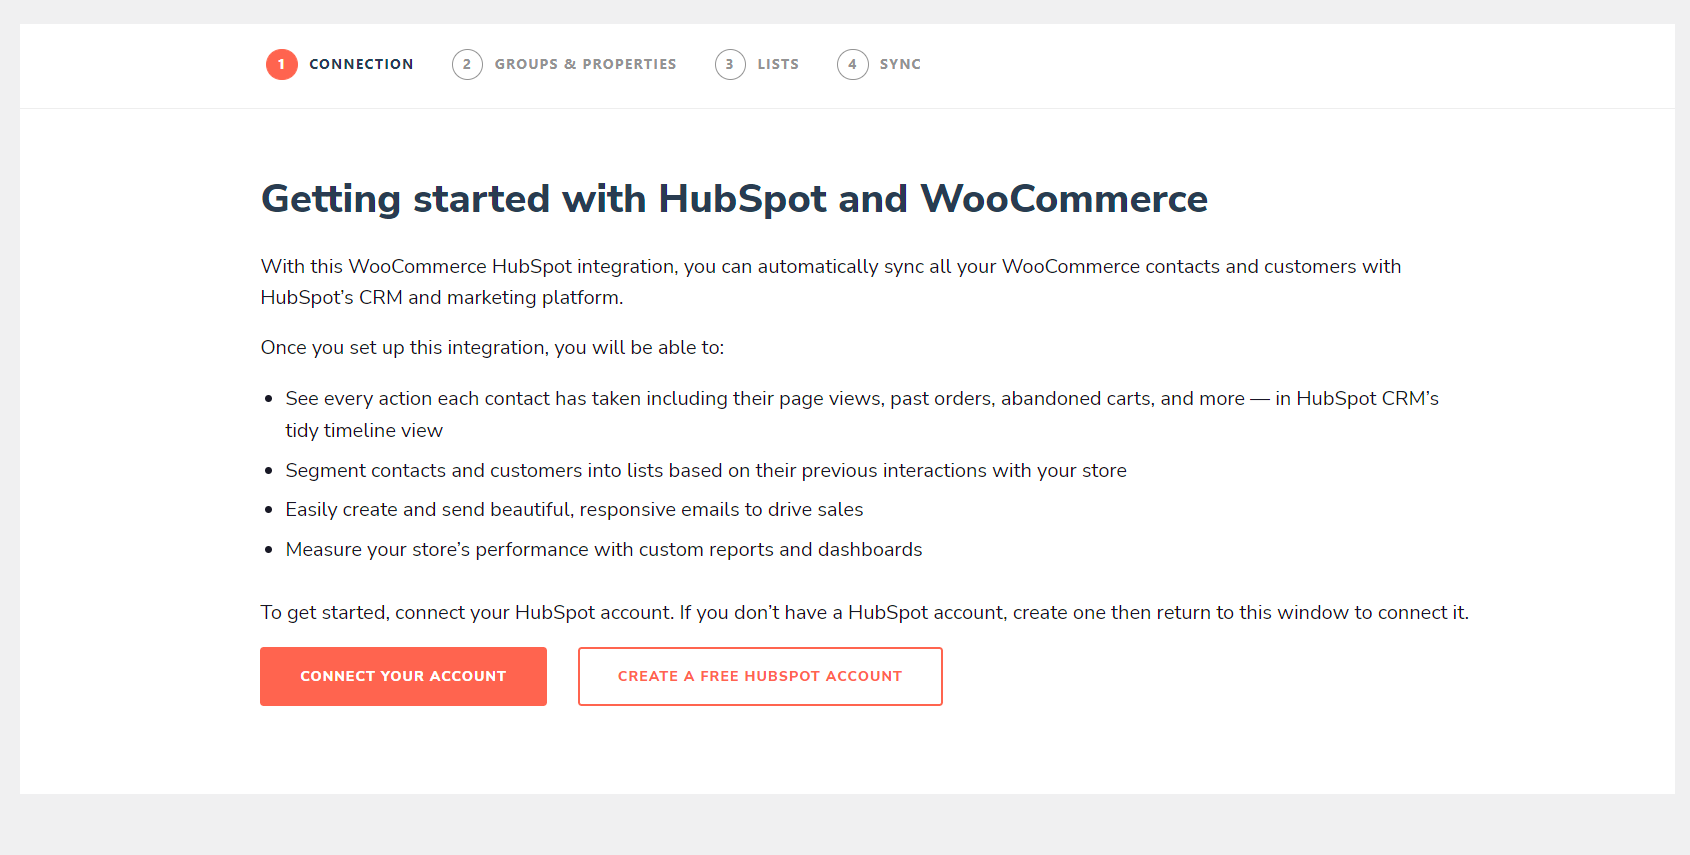 Connect your HubSpot account screen